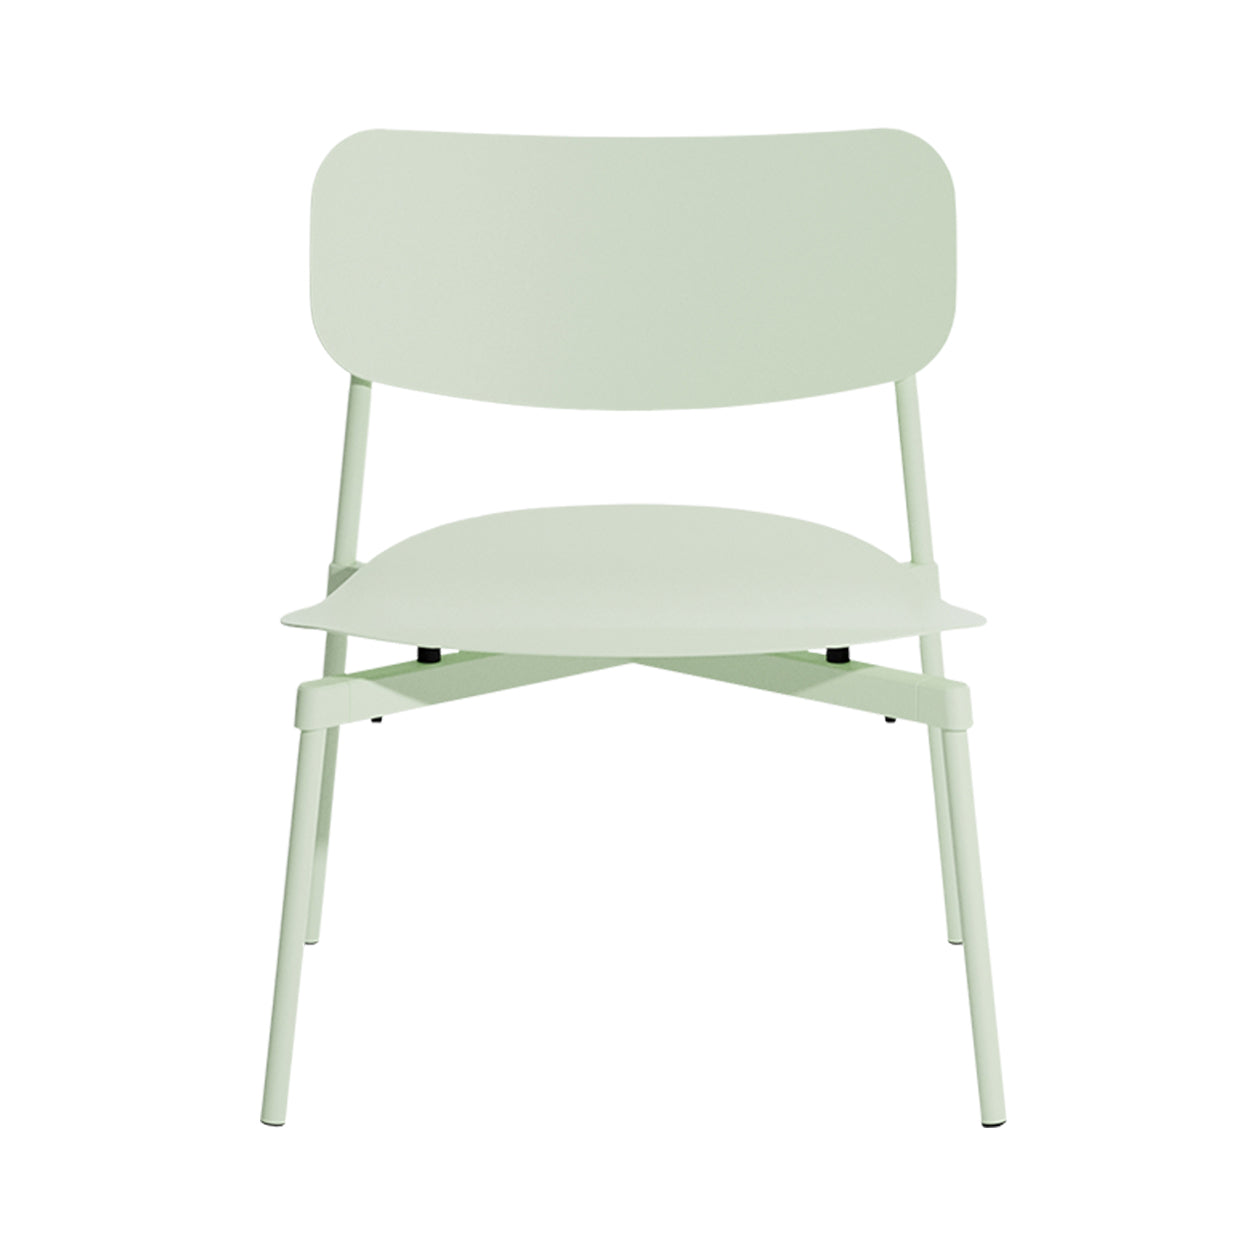 Fromme Stacking Lounge Chair: Pastel Green